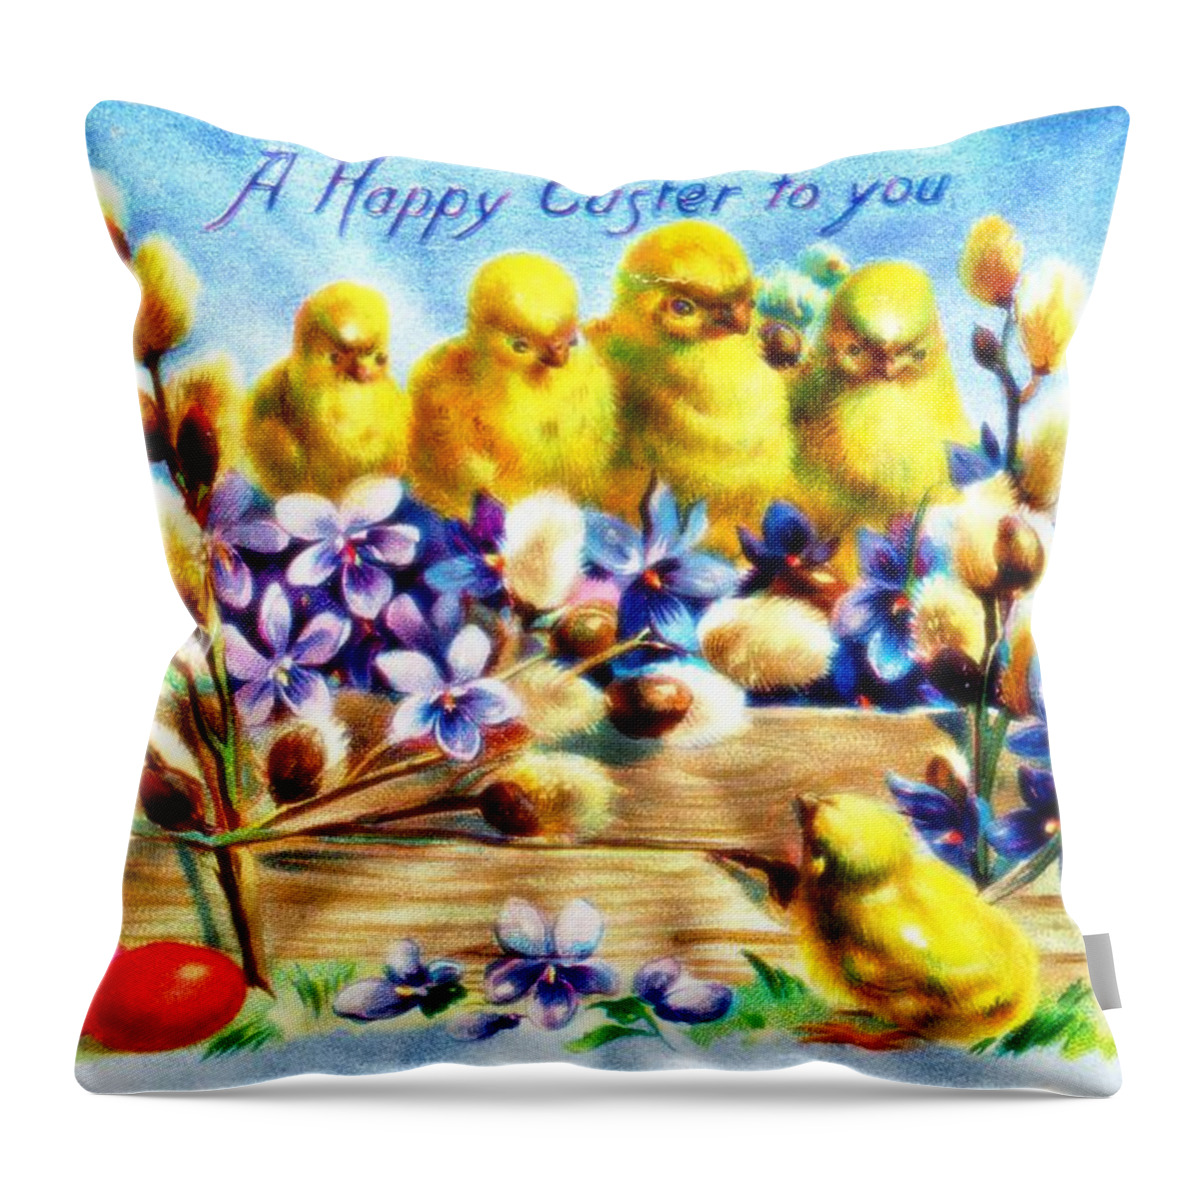 Easter Throw Pillow featuring the photograph A Happy Easter To You 1910 Vintage Postcard by Audreen Gieger